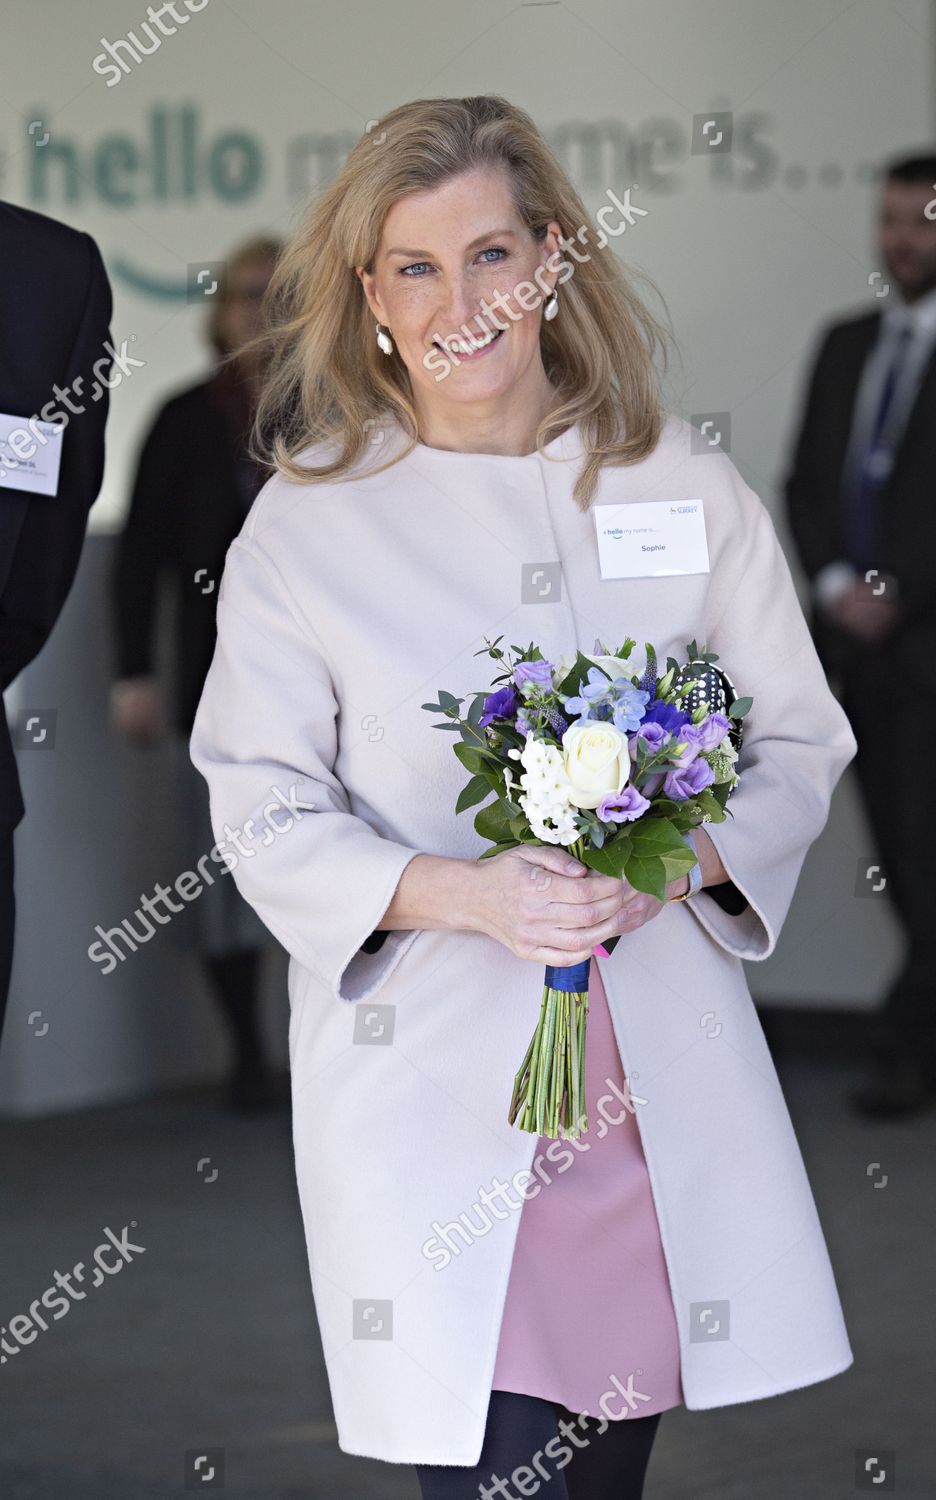 sophie-countess-of-wessex-opens-new-health-sciences-institute-university-of-surrey-guildford-uk-shutterstock-editorial-10542421ap.jpg